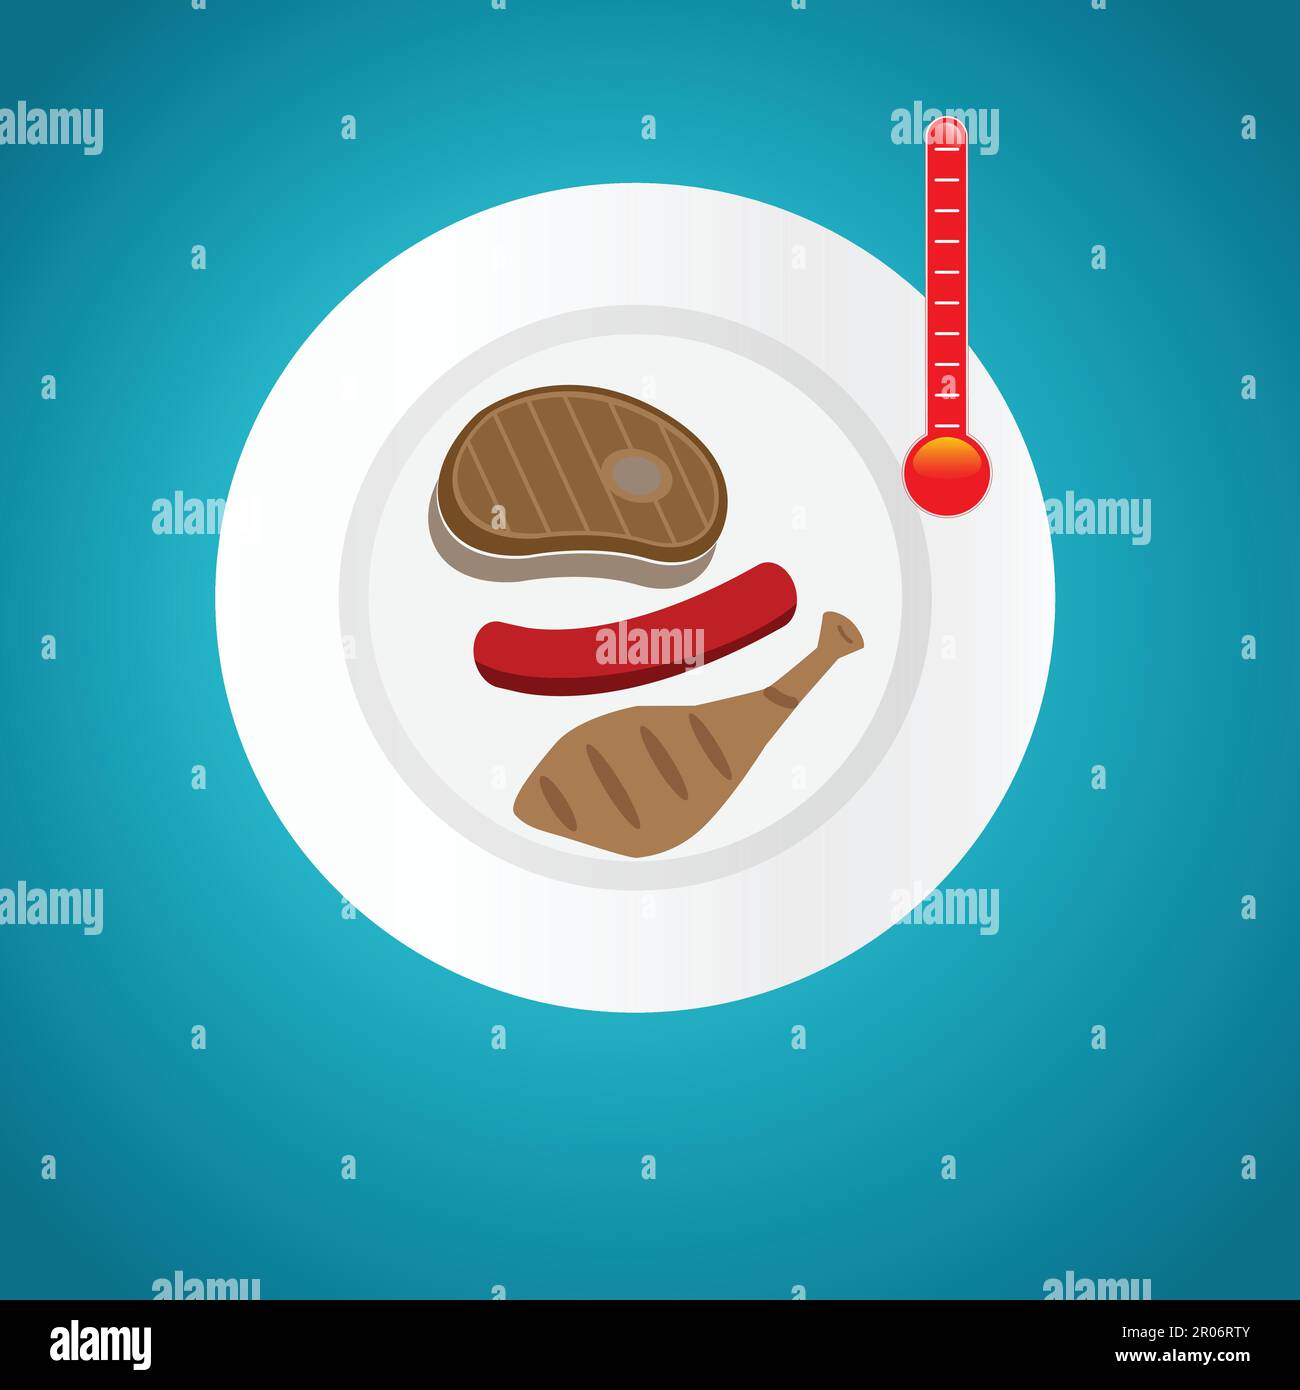 Measuring internal temperature of oven baked chicken. Meat / instant-read  thermometer to measure food safe temperature. Whole chicken in black pan  Stock Photo - Alamy